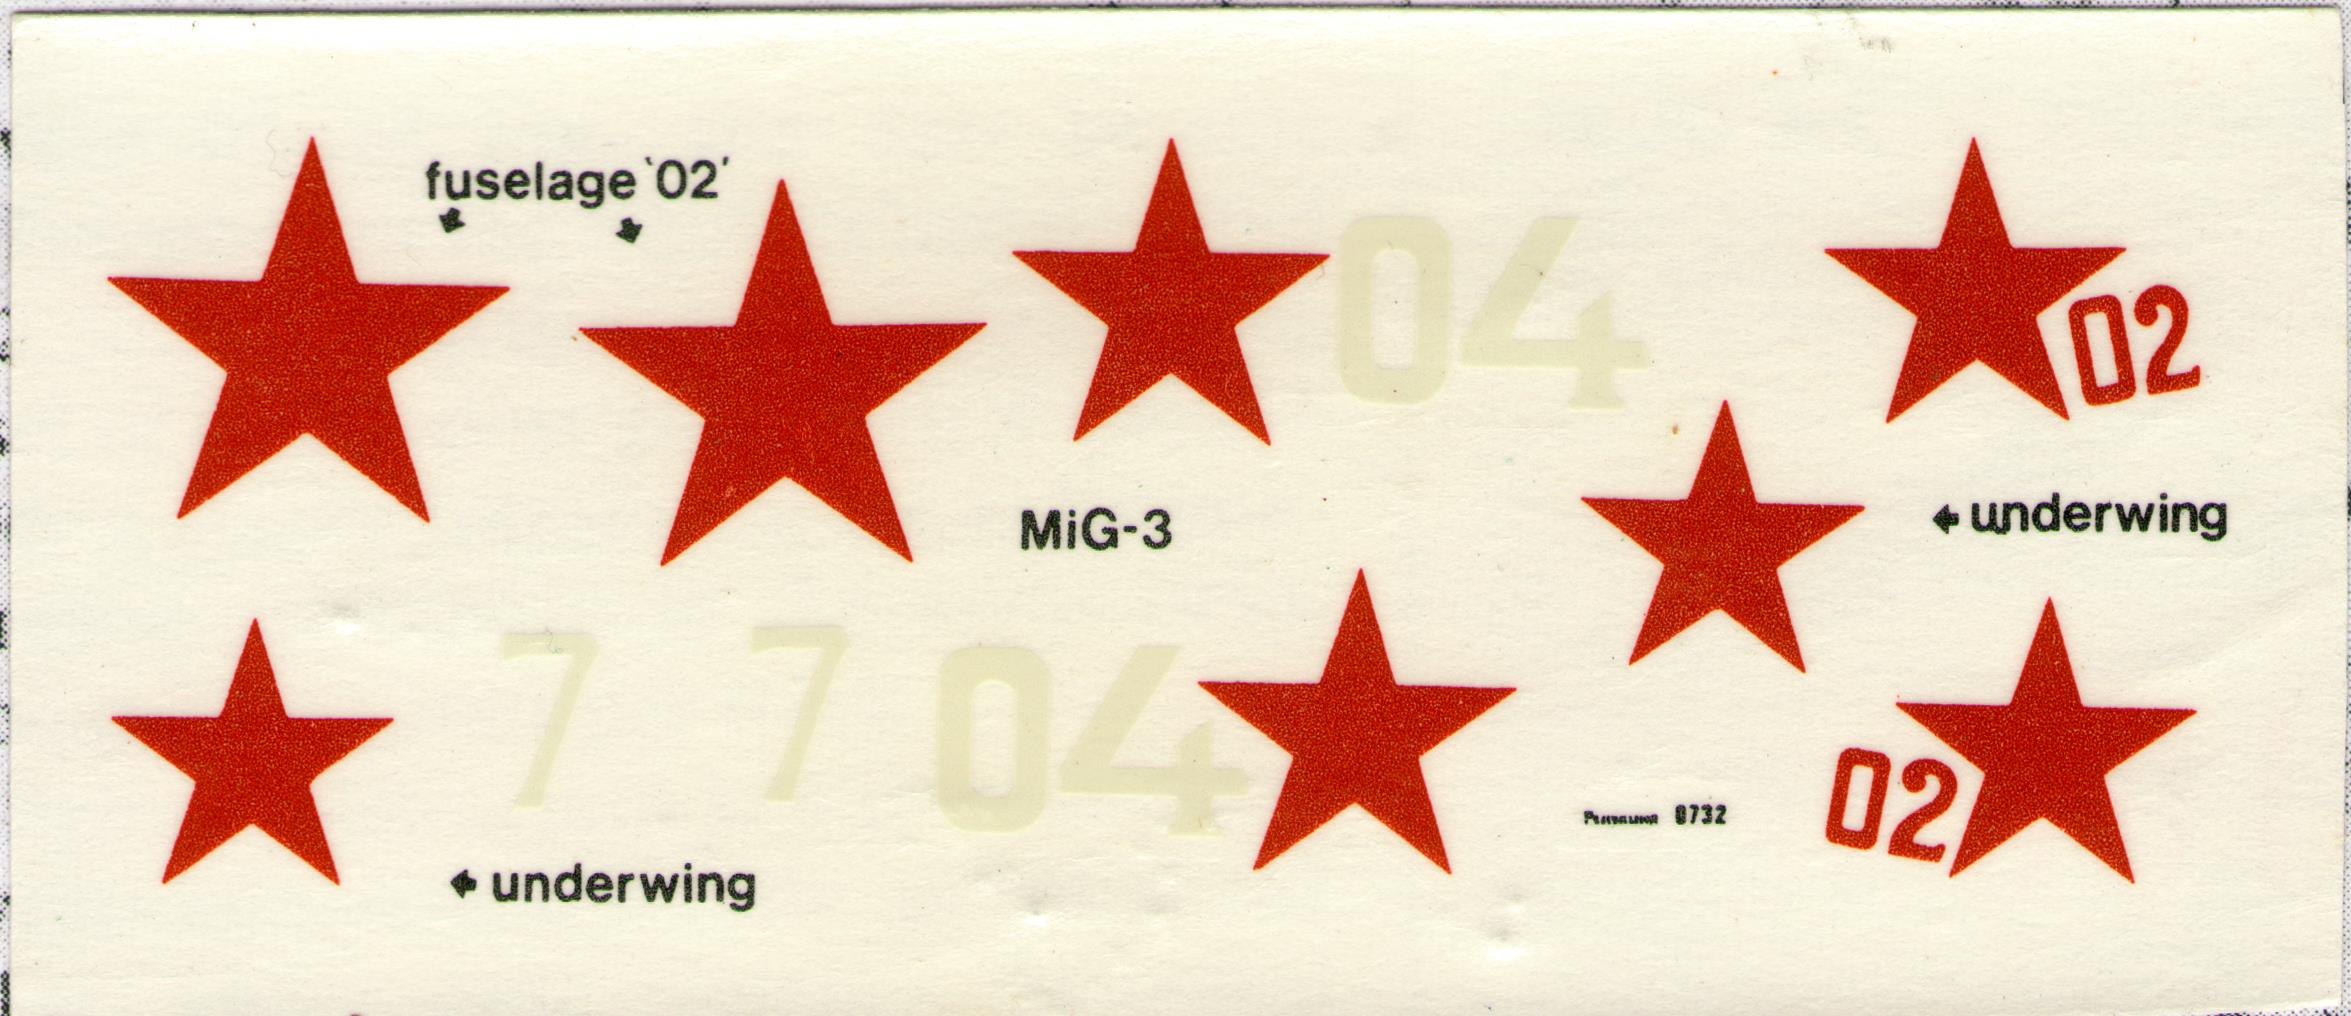 Red Star RS101 Mikoyan and Gurevich MiG-3, Red Star Model Kits Ltd, 1984 decal sheet